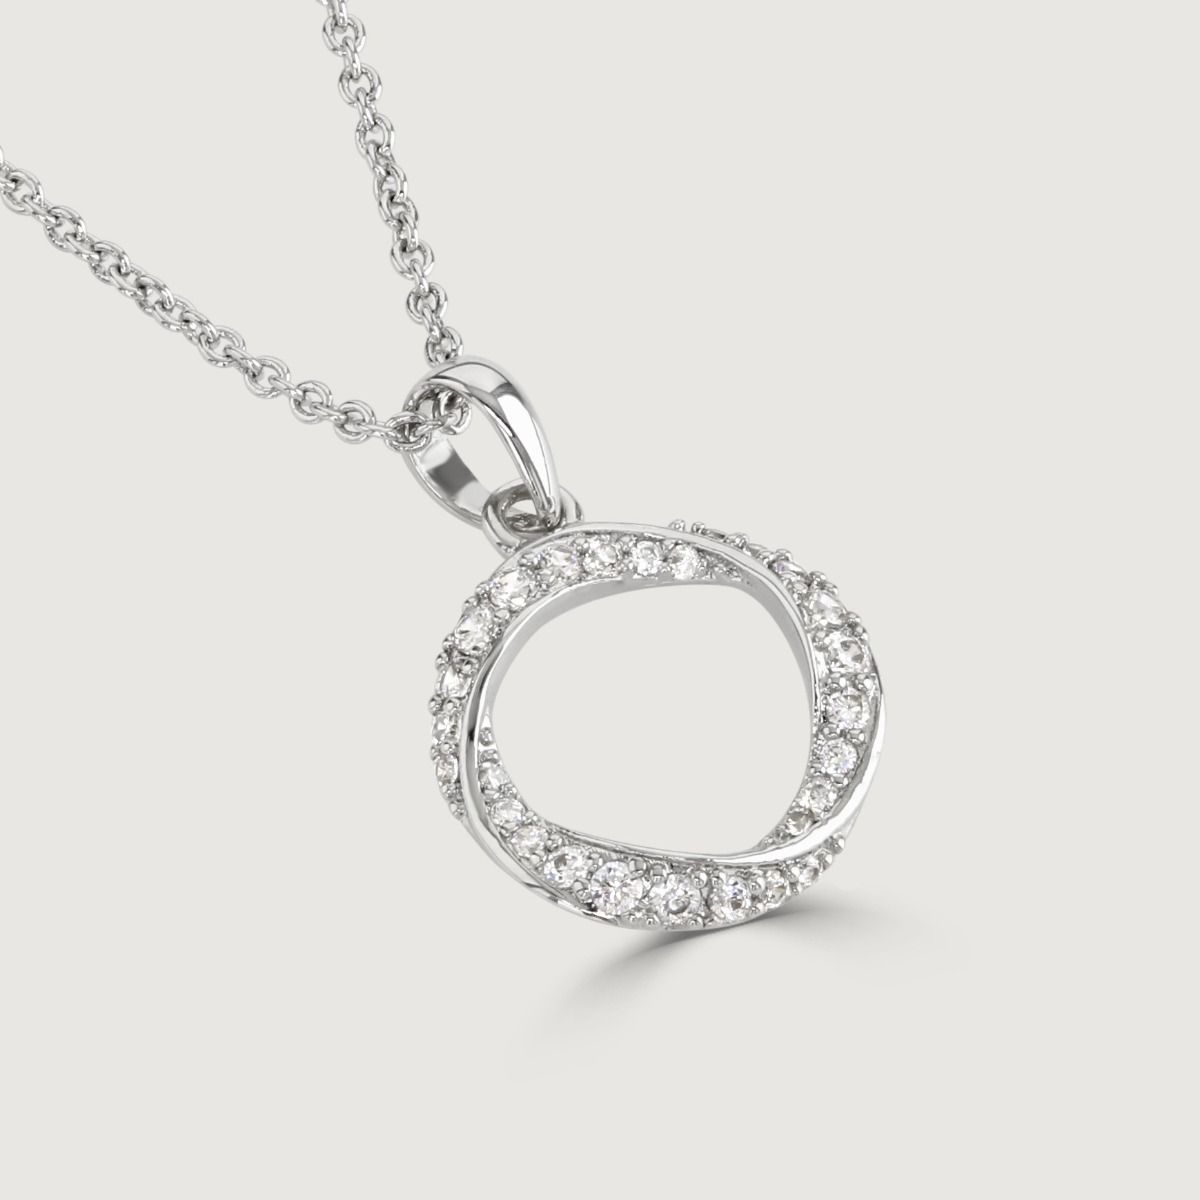 Elegance meets charm with our Viennese Hoop Necklace. Its captivating design showcases a delicate whipped Viennese swirl, elegantly intertwining a lustrous polished band with sparkling cubic zirconia. Elevate your style with this exquisite accessory, a pe